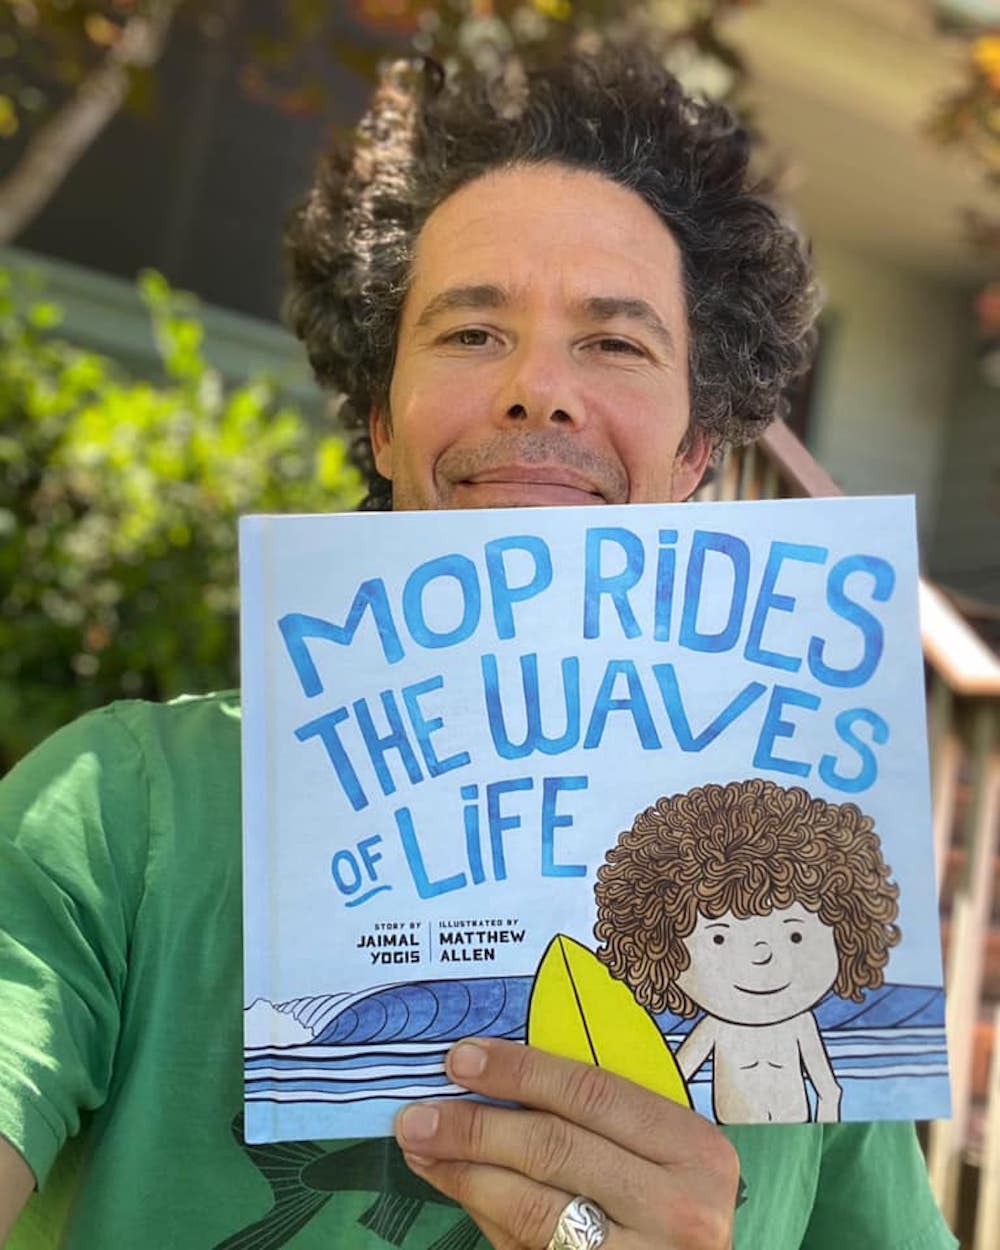 Mop Rides the Waves of Life